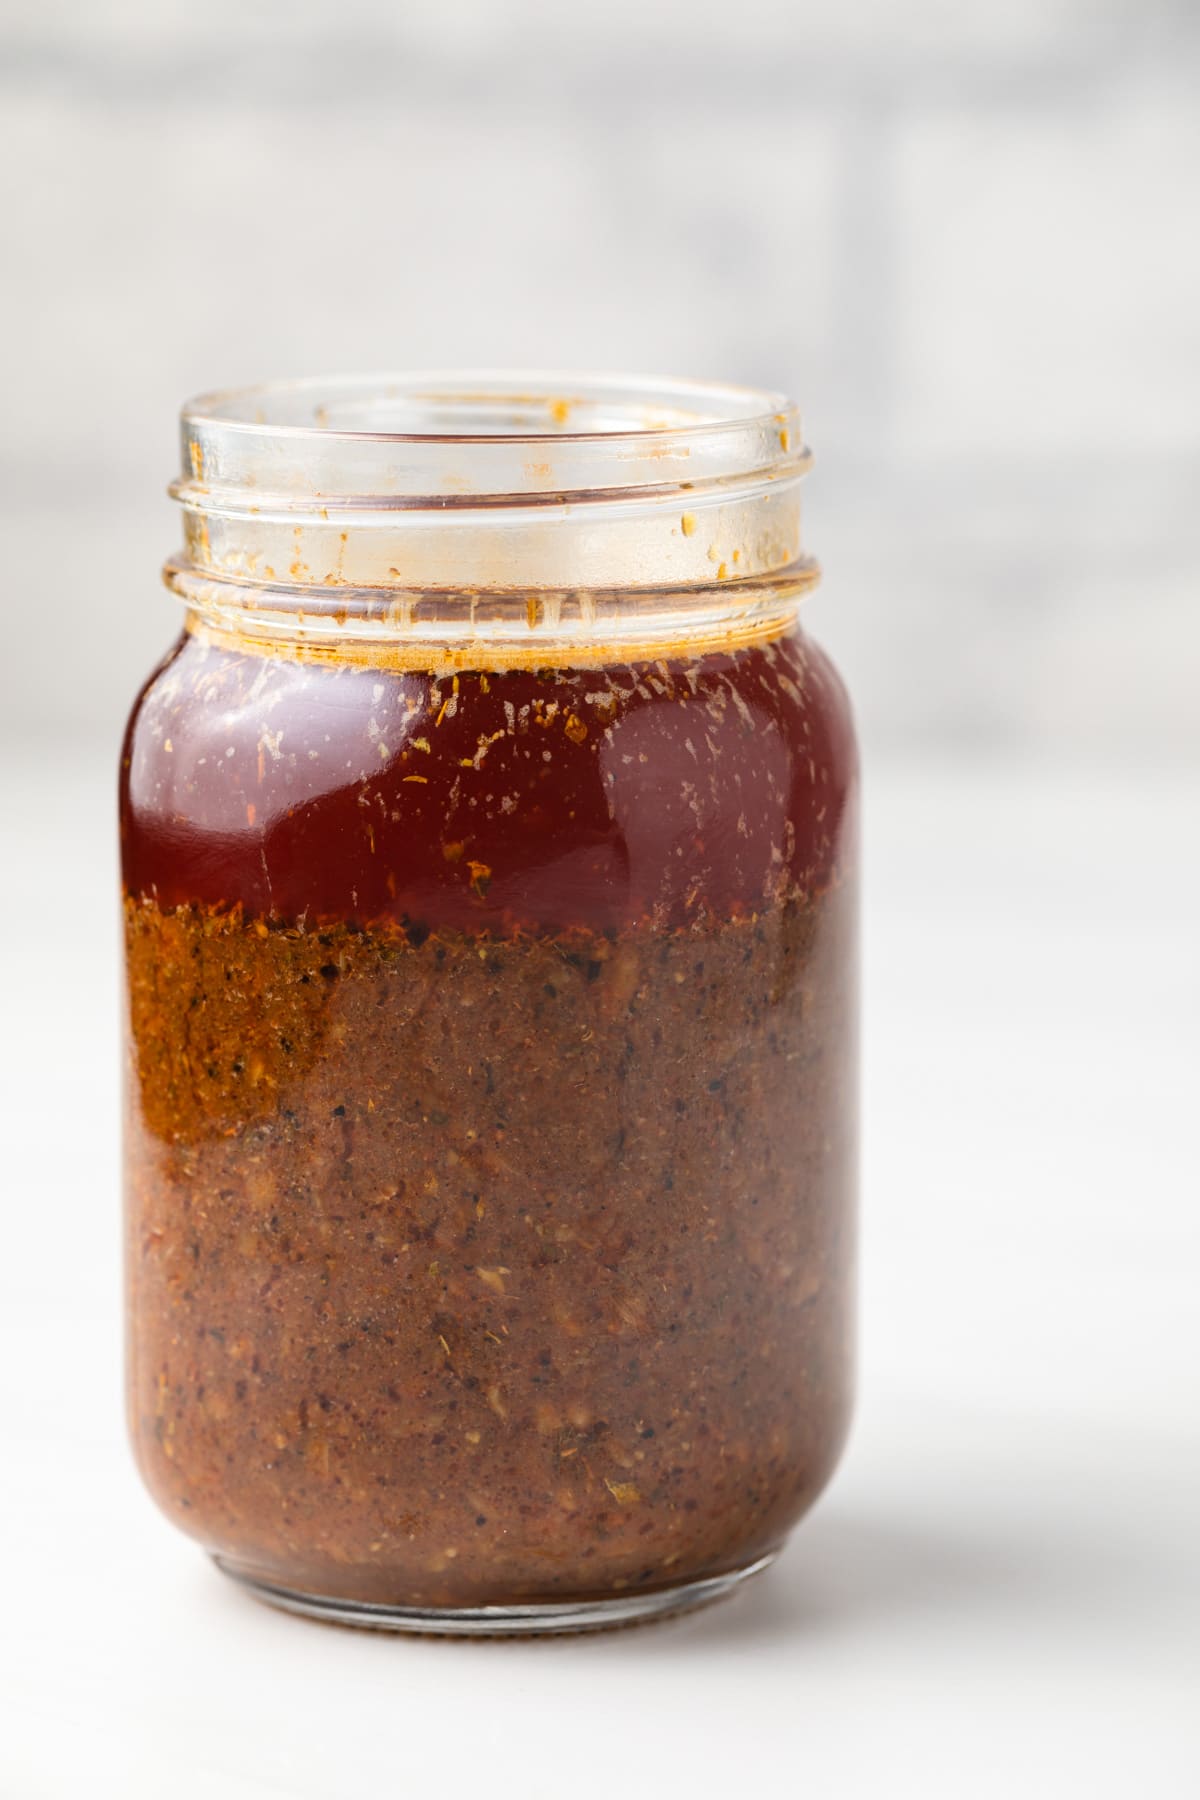 Boiling crab sauce in a glass jar